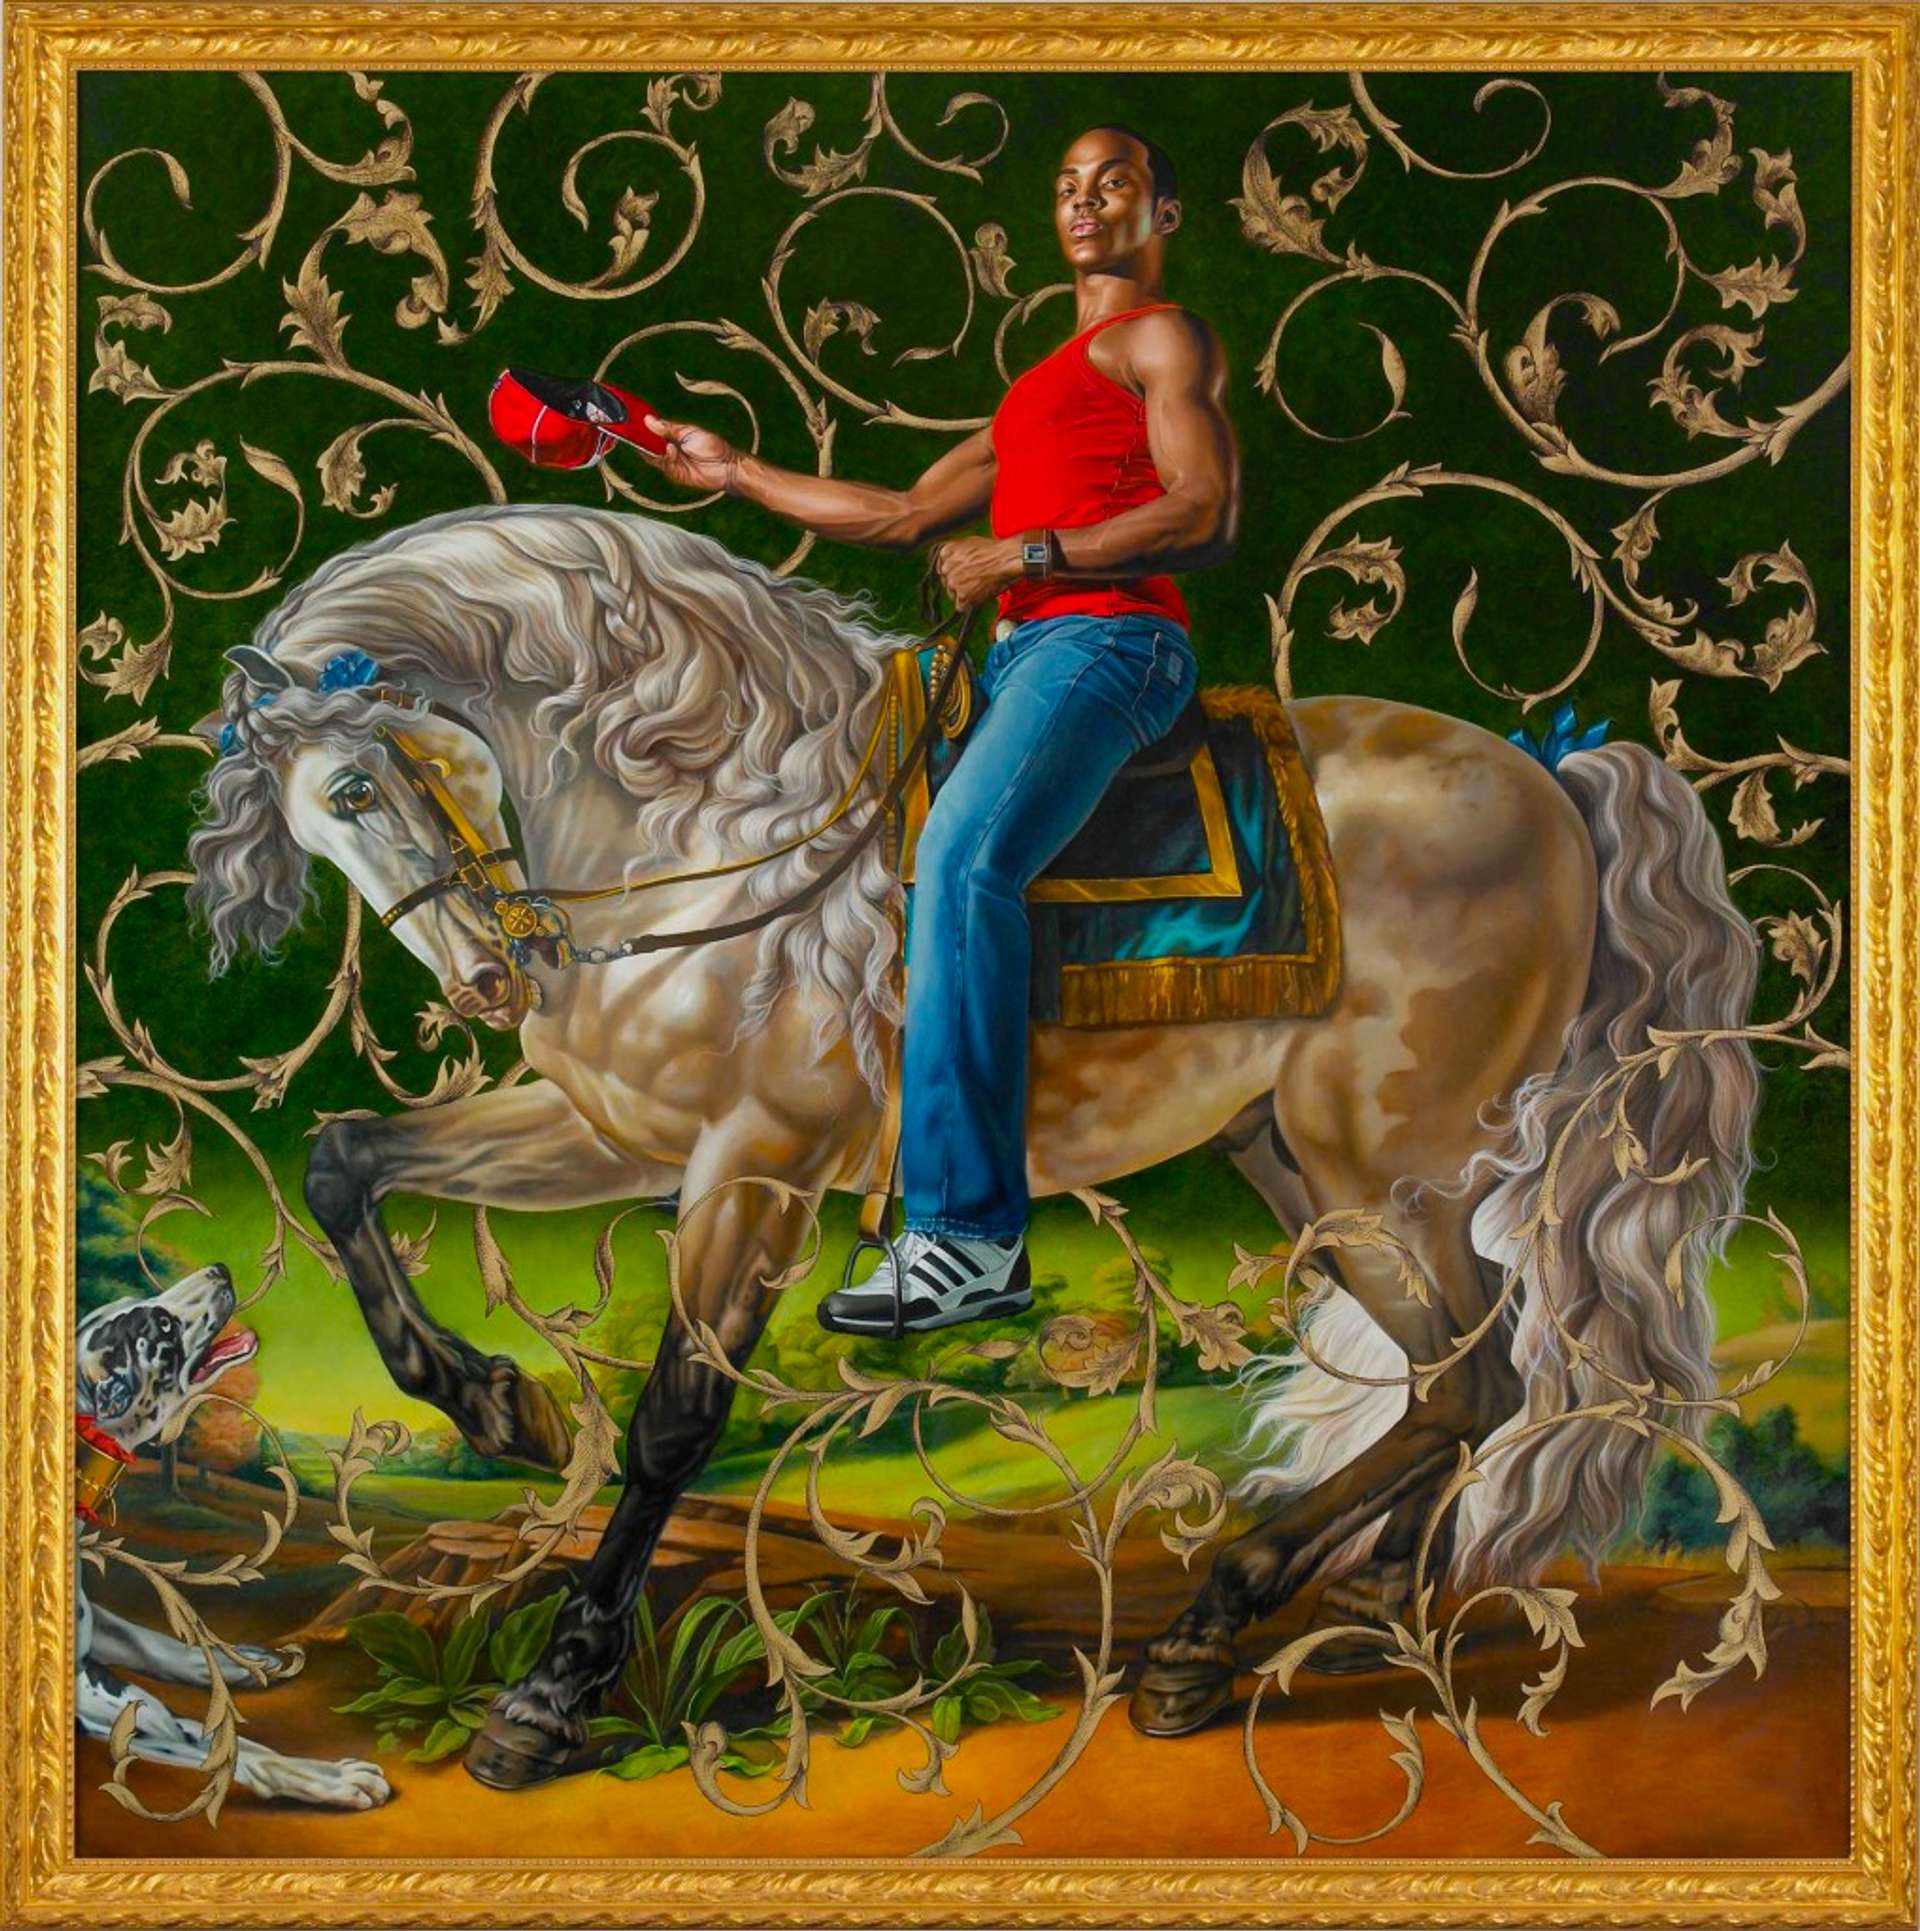 A young man sits on an immaculately groomed white and grey horse with its head bowed. The man sits on a silk saddle holding the reins, wearing a vest, jeans and trainers. In the other hand, he holds a baseball cap out in a regal pose.